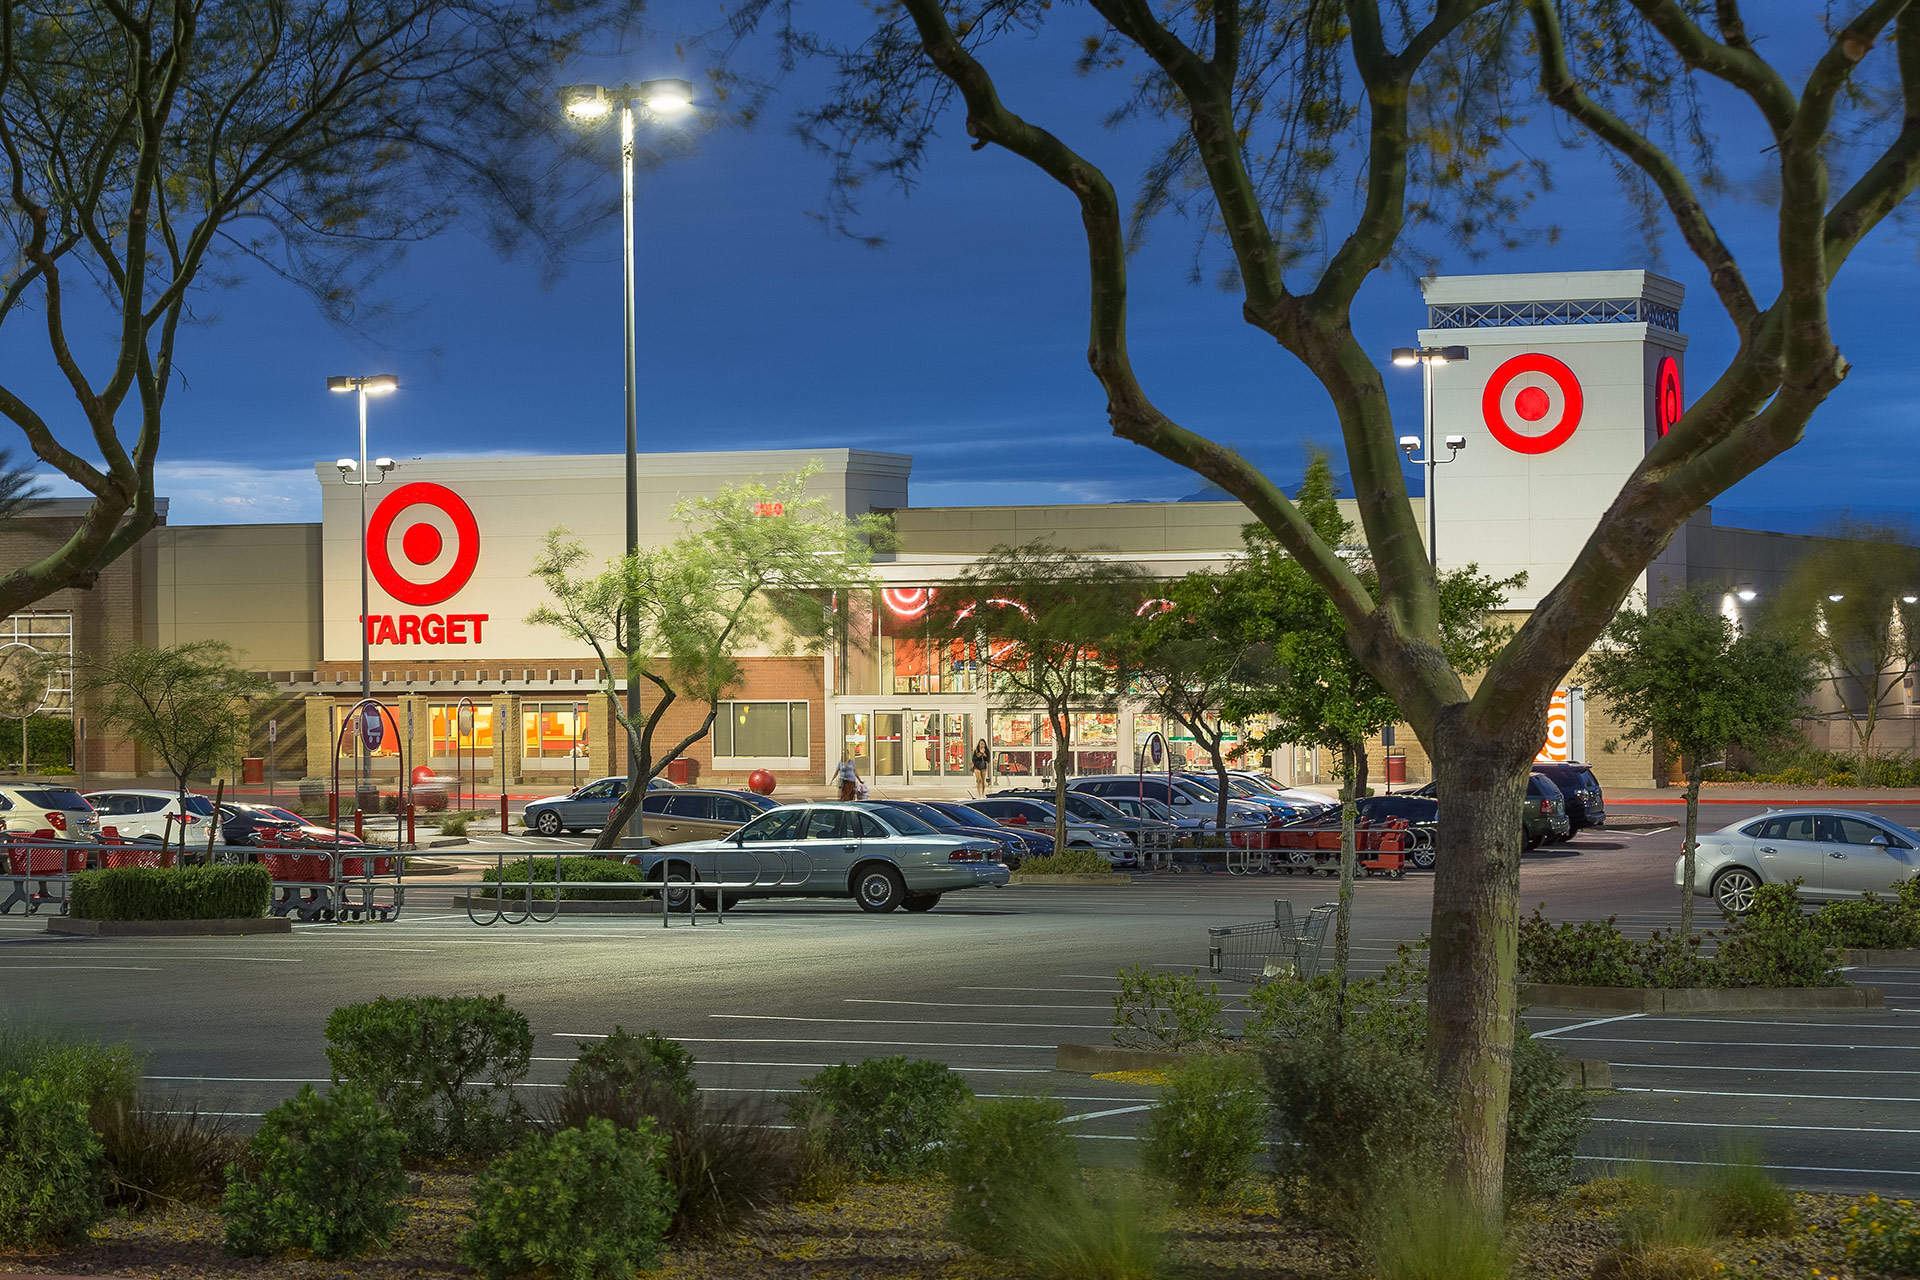 A target retail store at dusk with cars in the parking lot and a tree in the foreground.